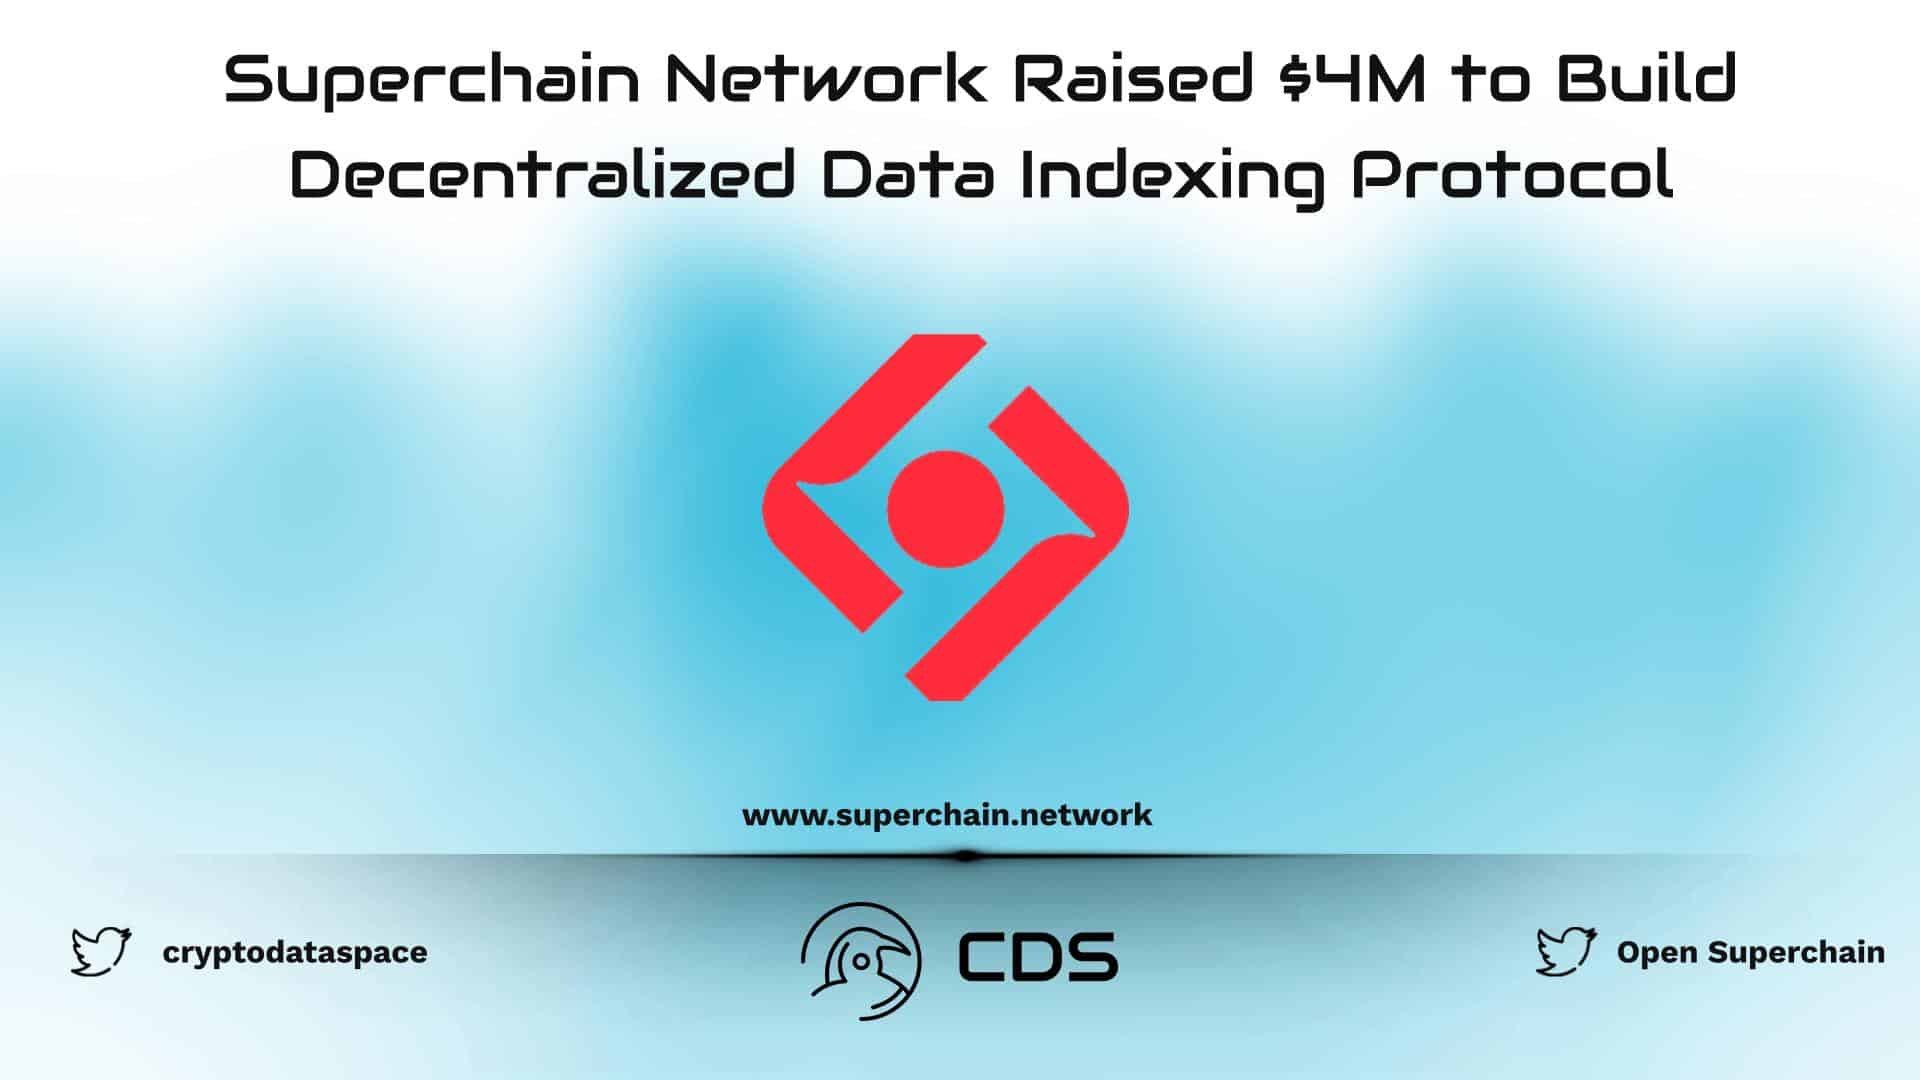 Superchain Network Raised $4M to Build Decentralized Data Indexing Protocol